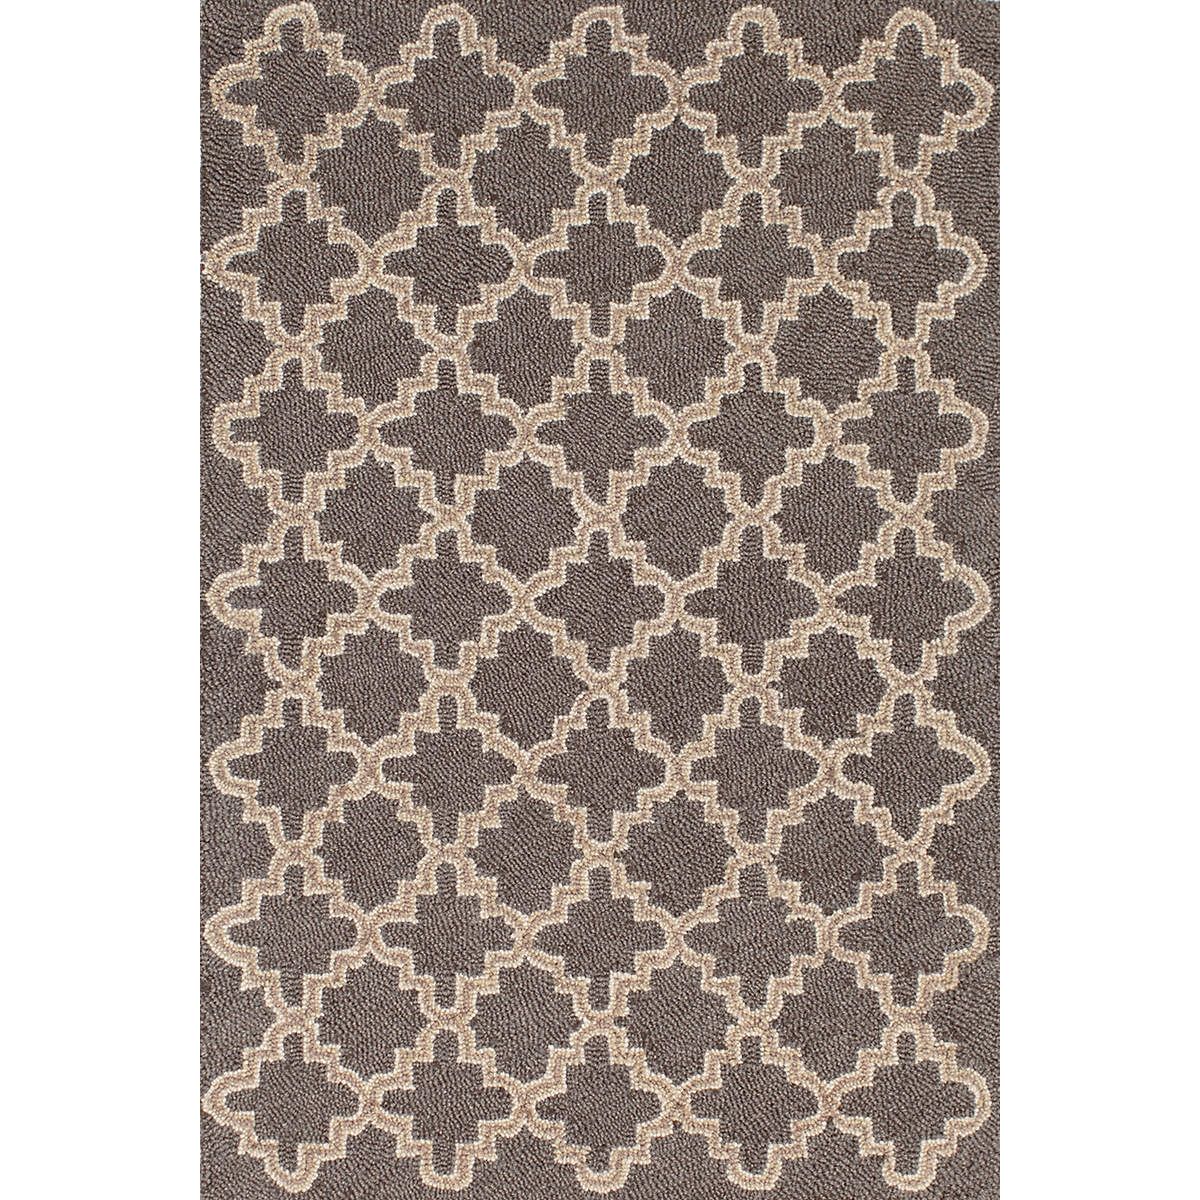 Rugs Area Rugs 3×5 3×5 Rug 4×6 Area Rugs Intended For 4×6 Wool Area Rugs (View 6 of 15)